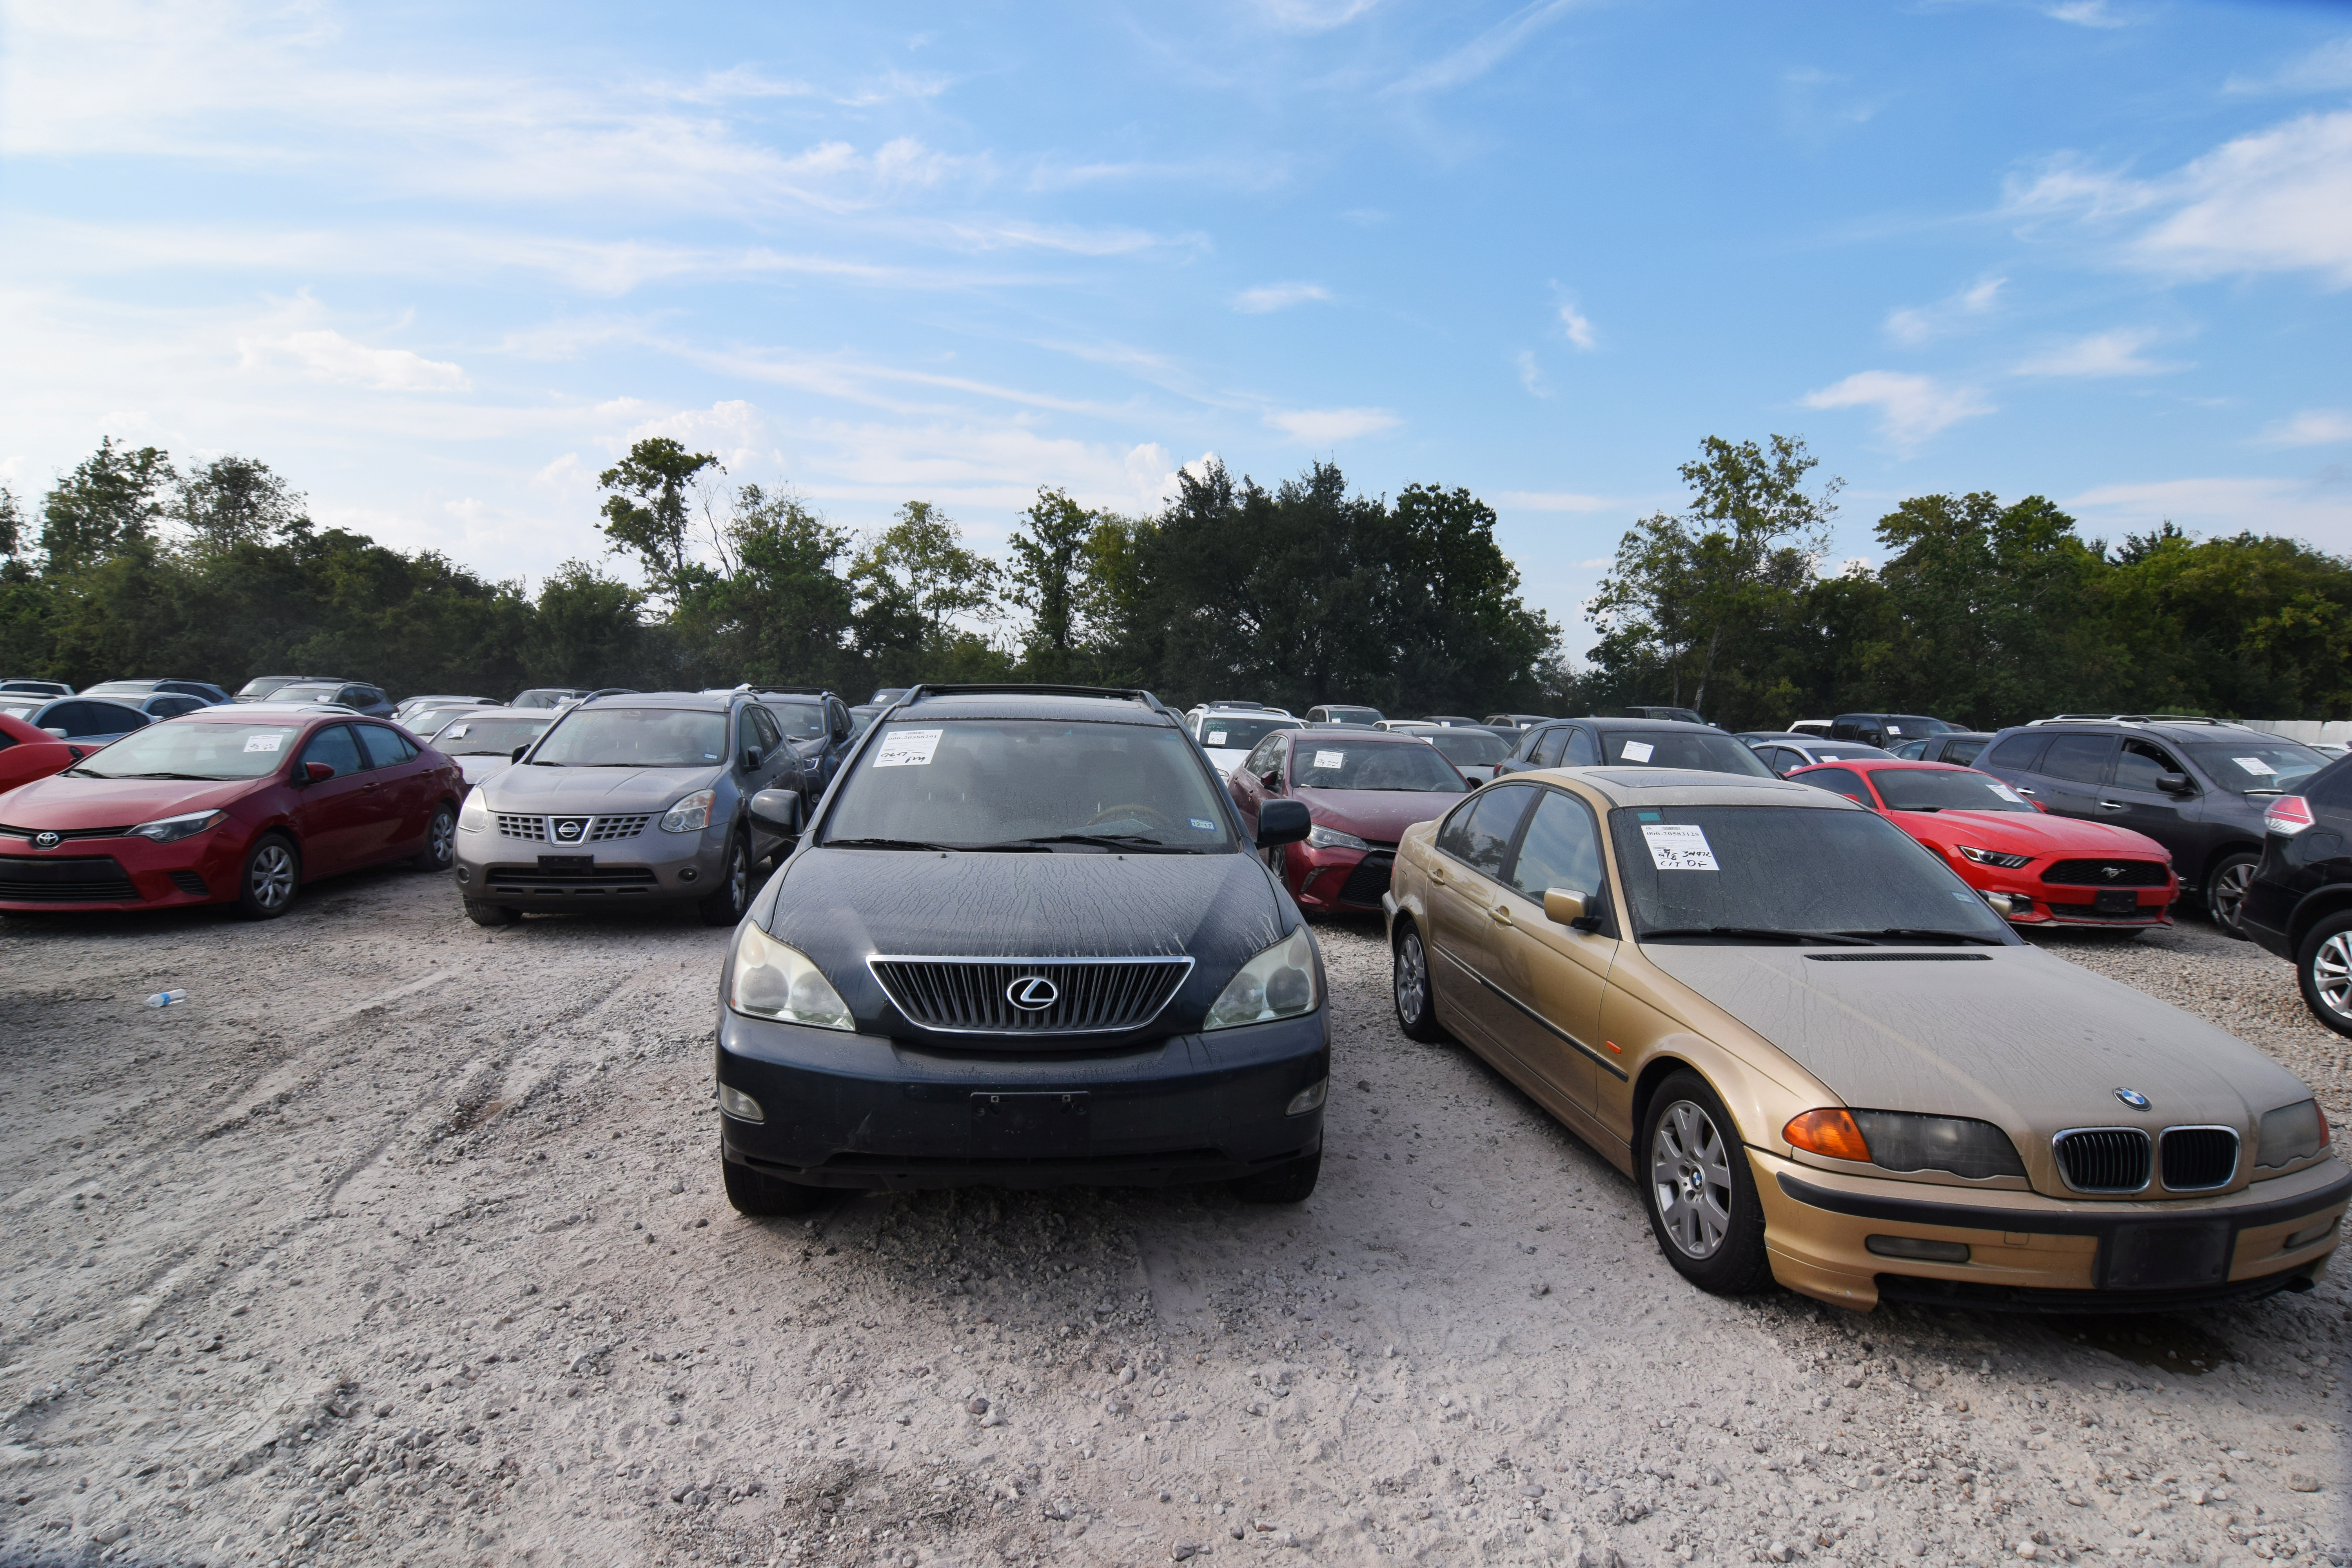 Cars damaged by Hurricane Harvey wait to be processed at a local staging area in Houston